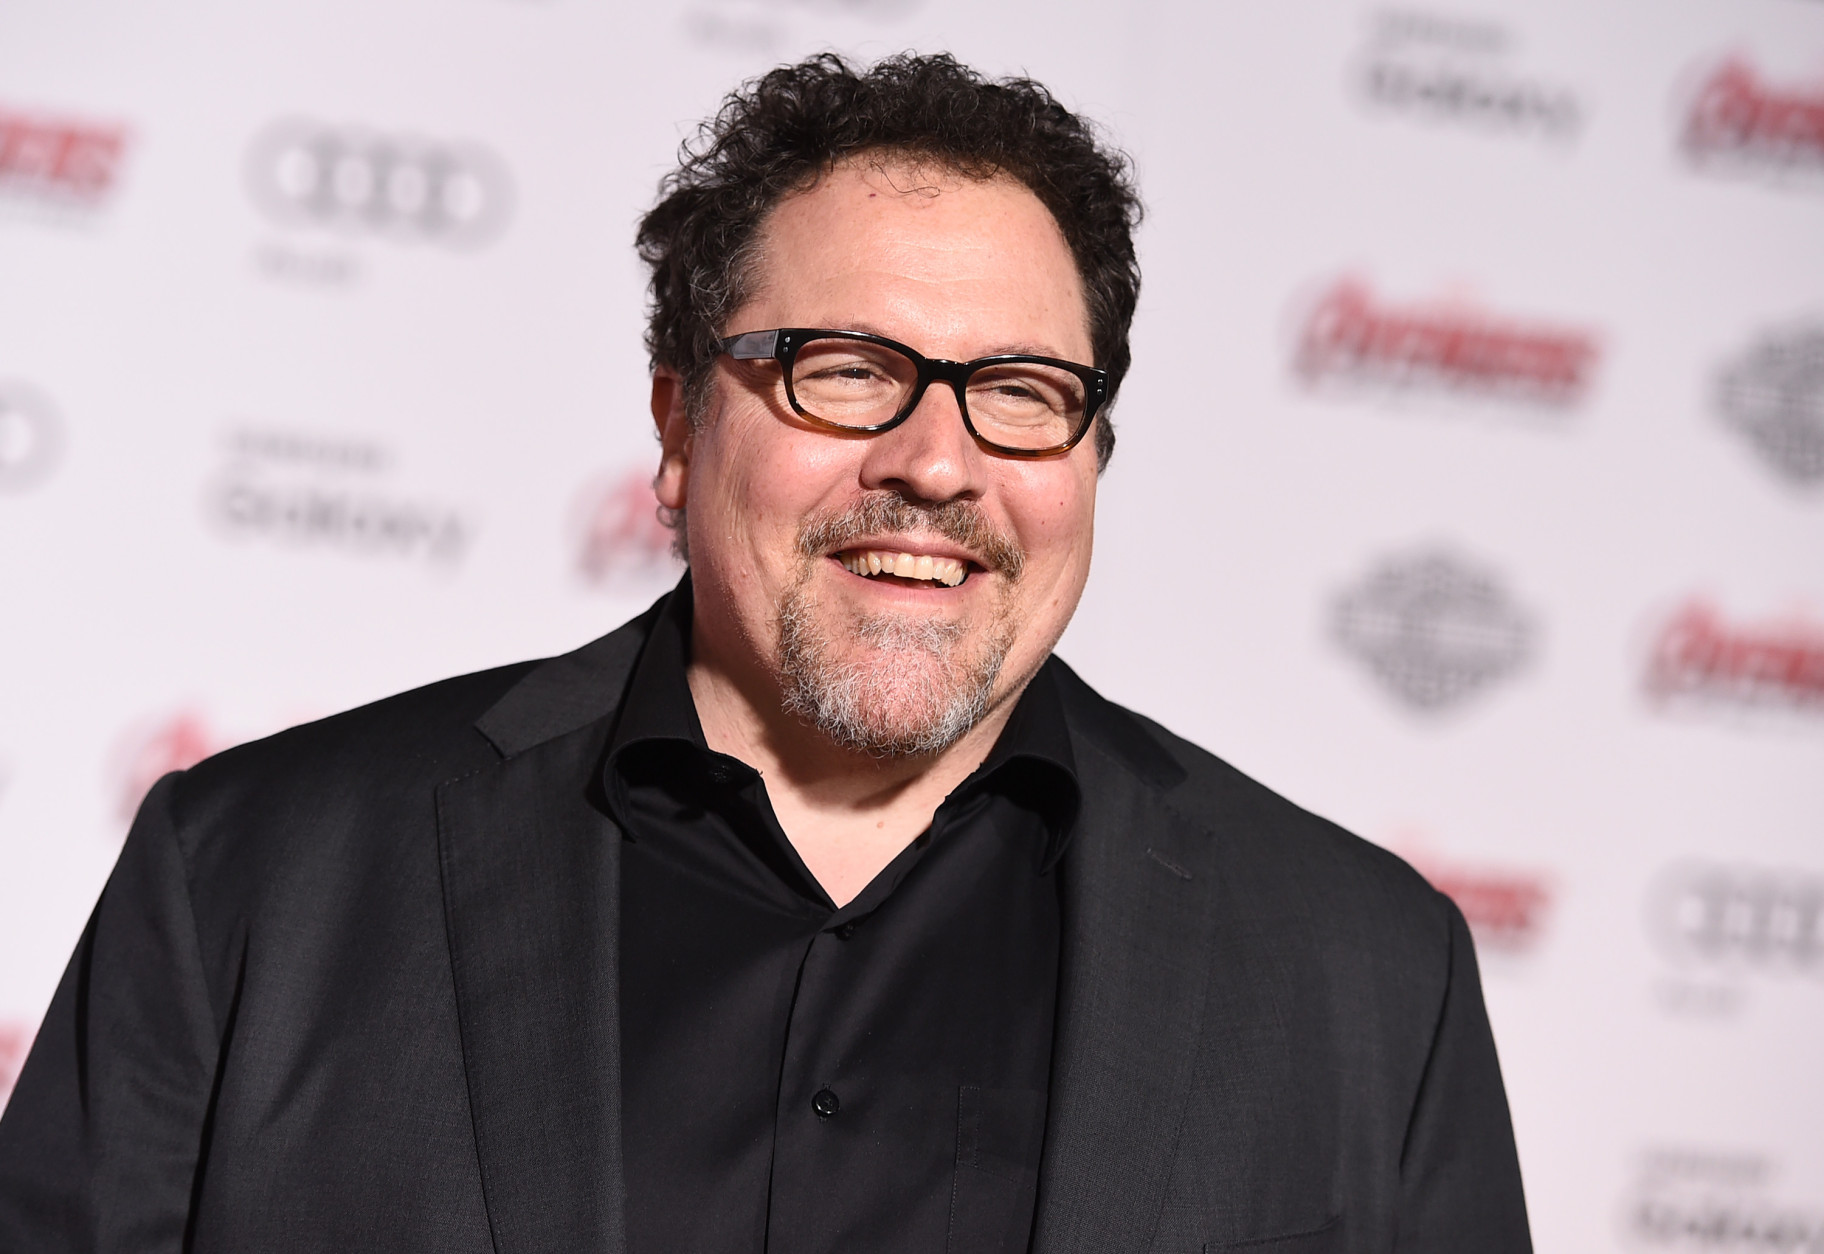 Jon Favreau arrives at the Los Angeles premiere of "Avengers: Age Of Ultron" at the Dolby Theatre on Monday, April 13, 2015. (Photo by Jordan Strauss/Invision/AP)